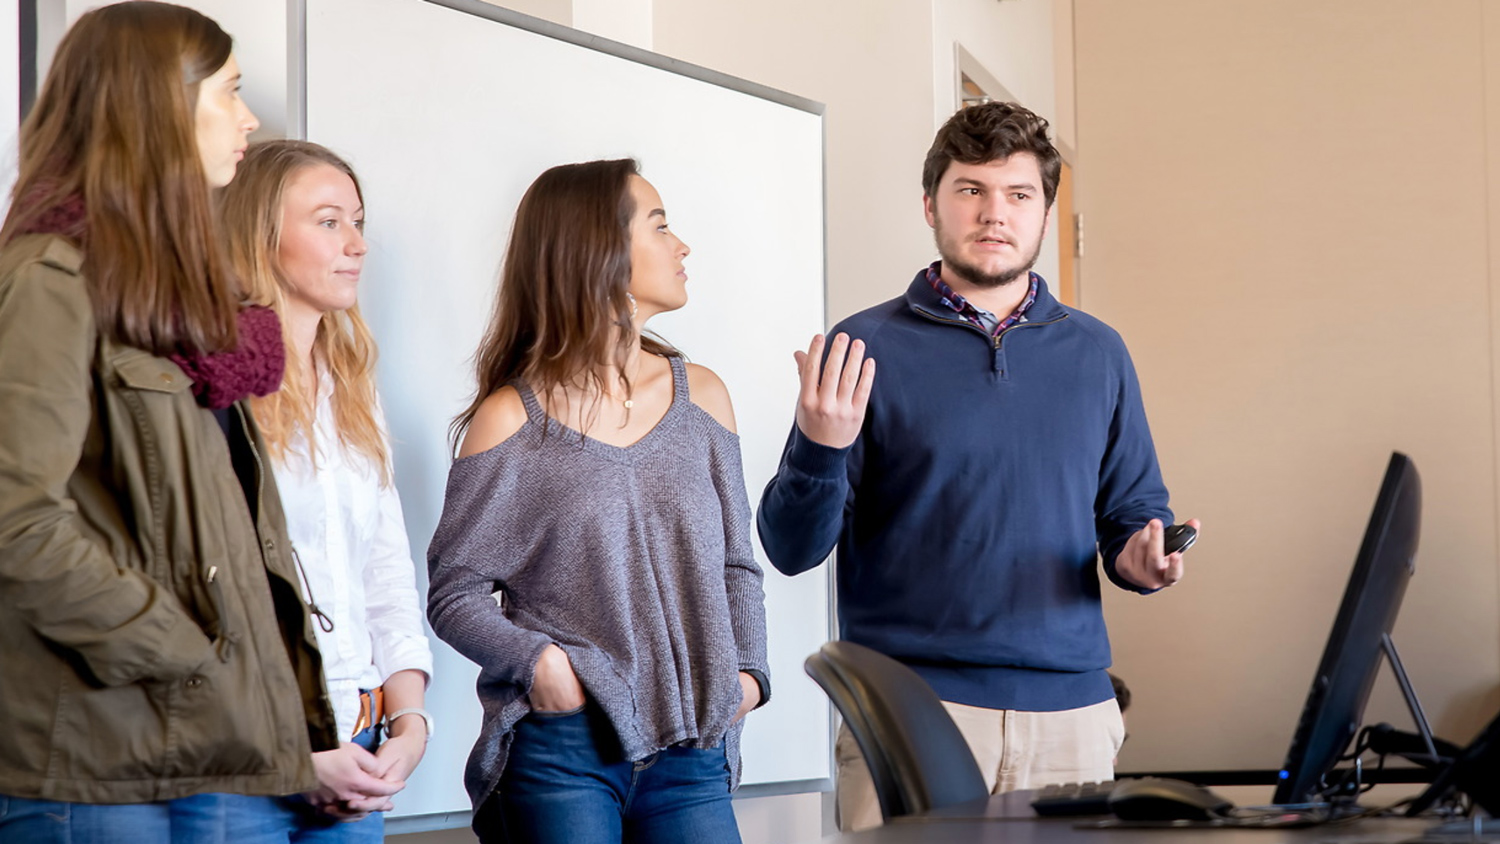 Four students present in front of a classroom